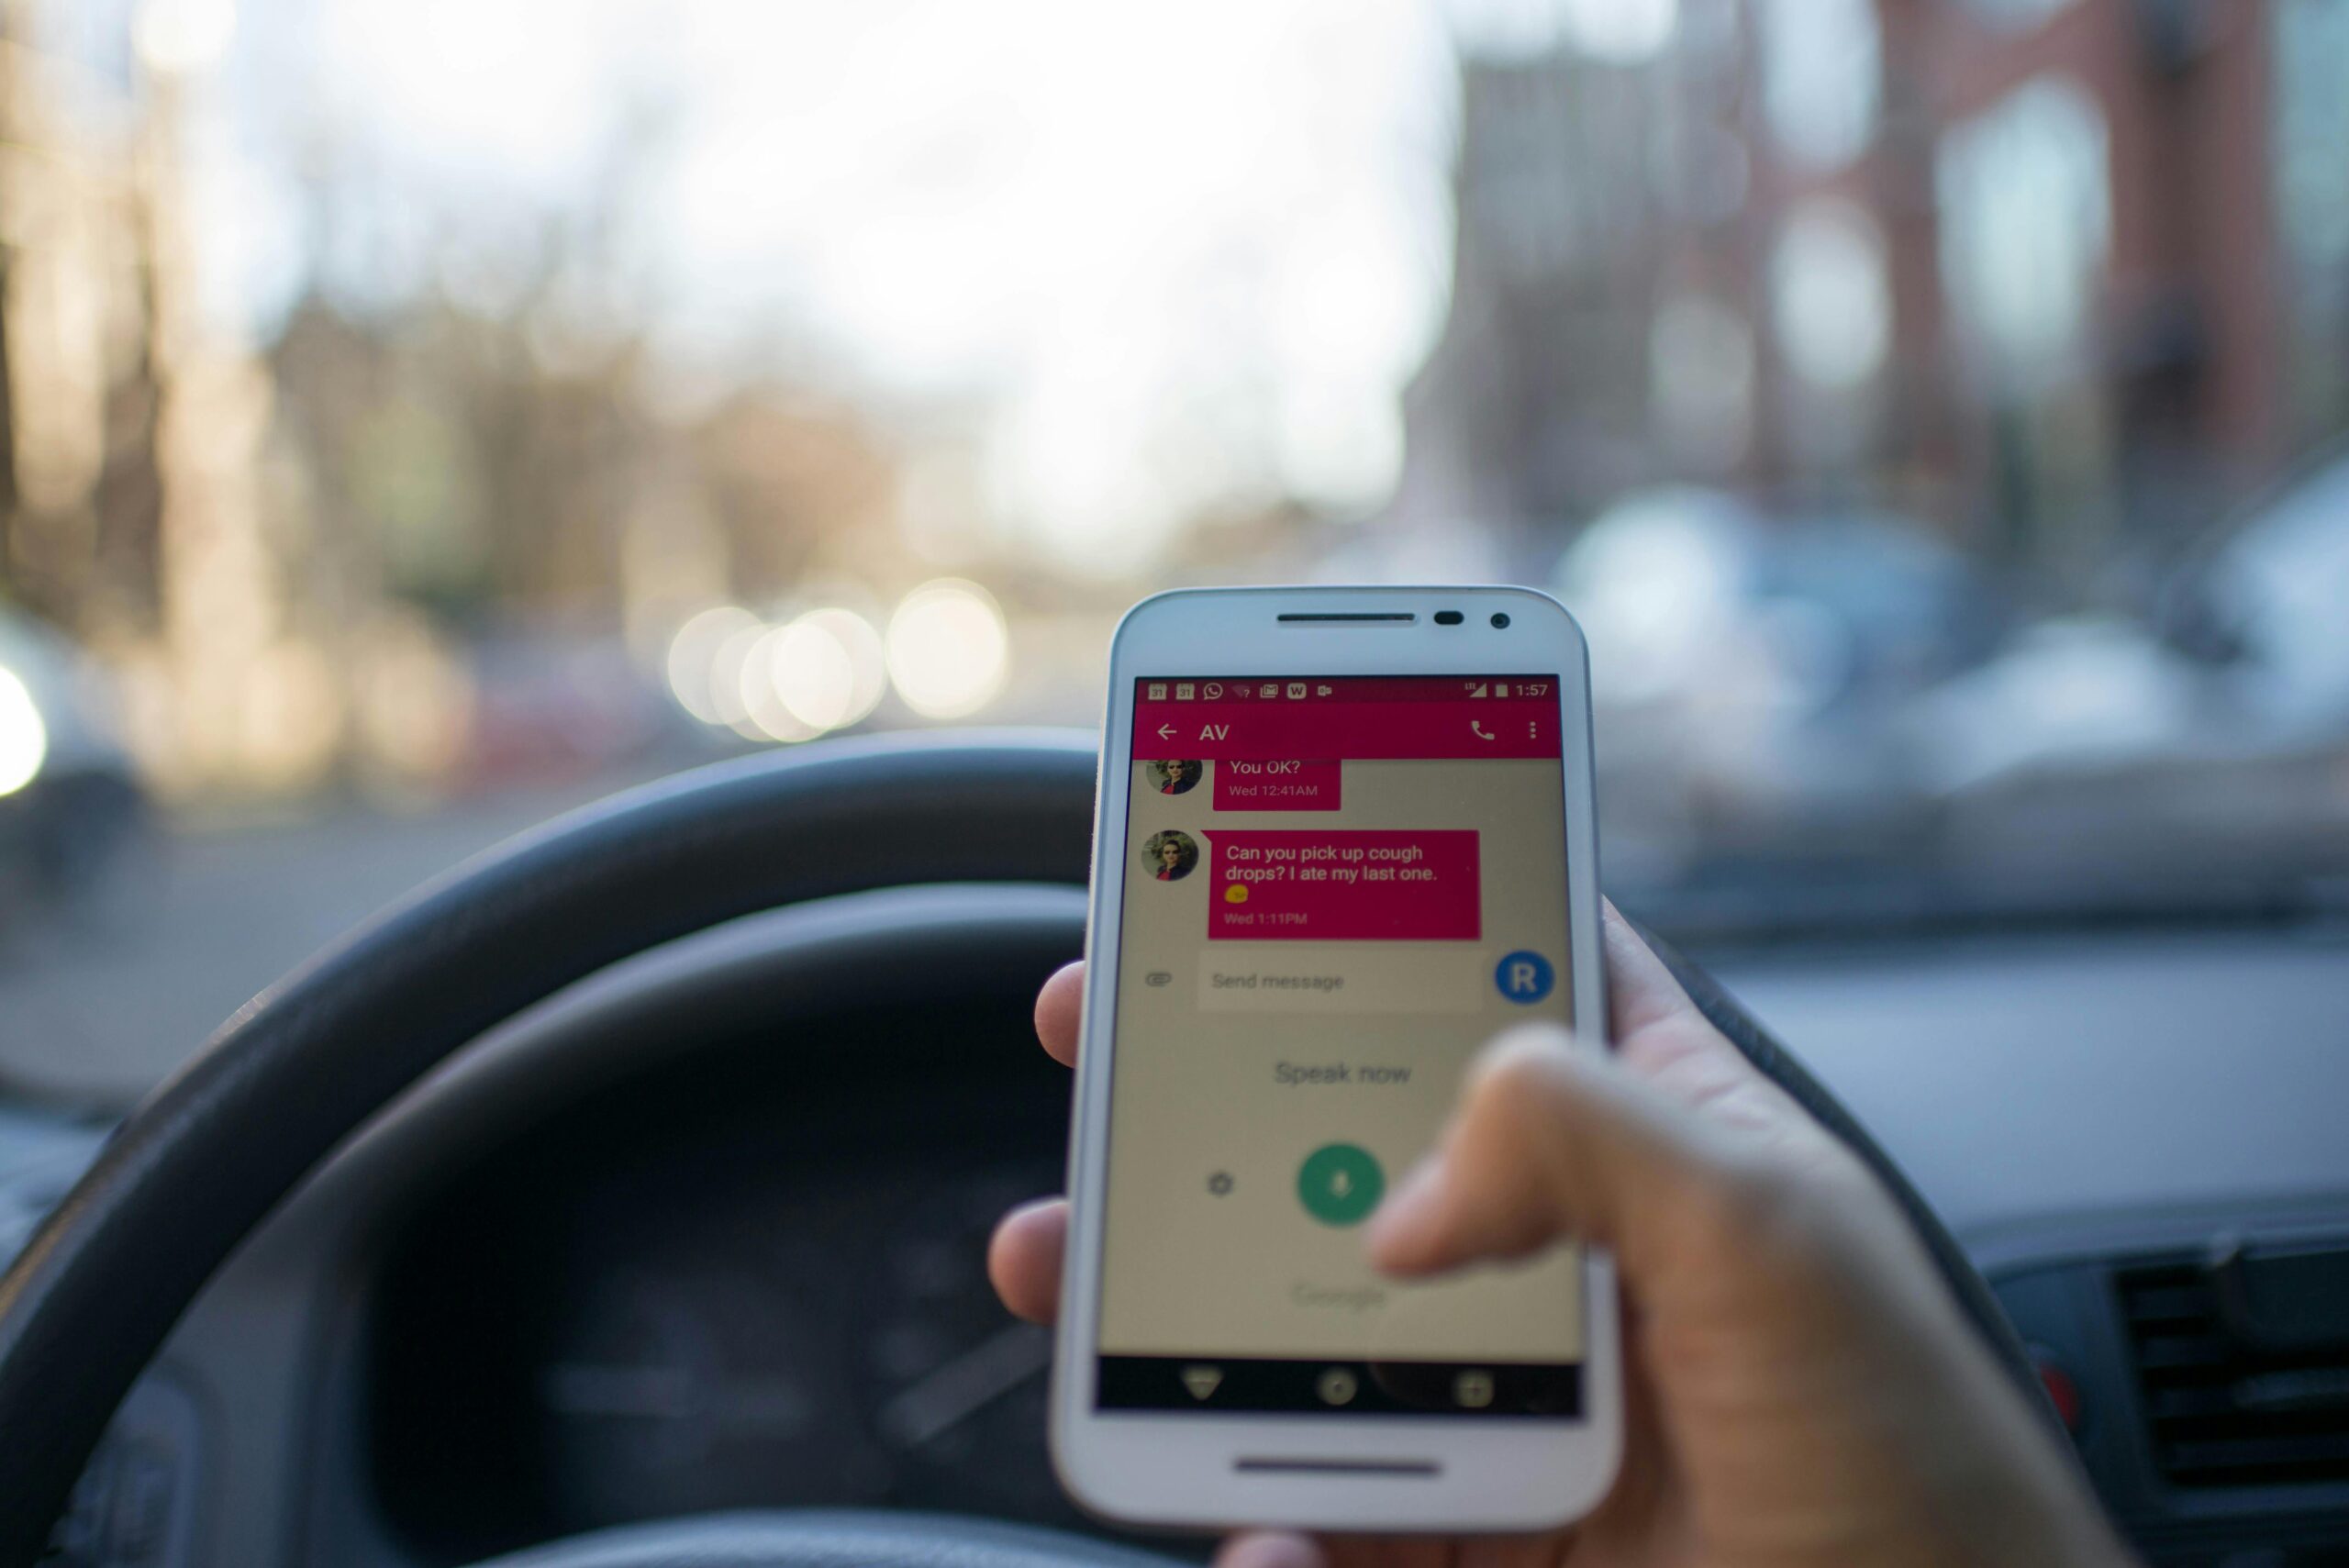 What are The Most Common Causes of Distracted Driving